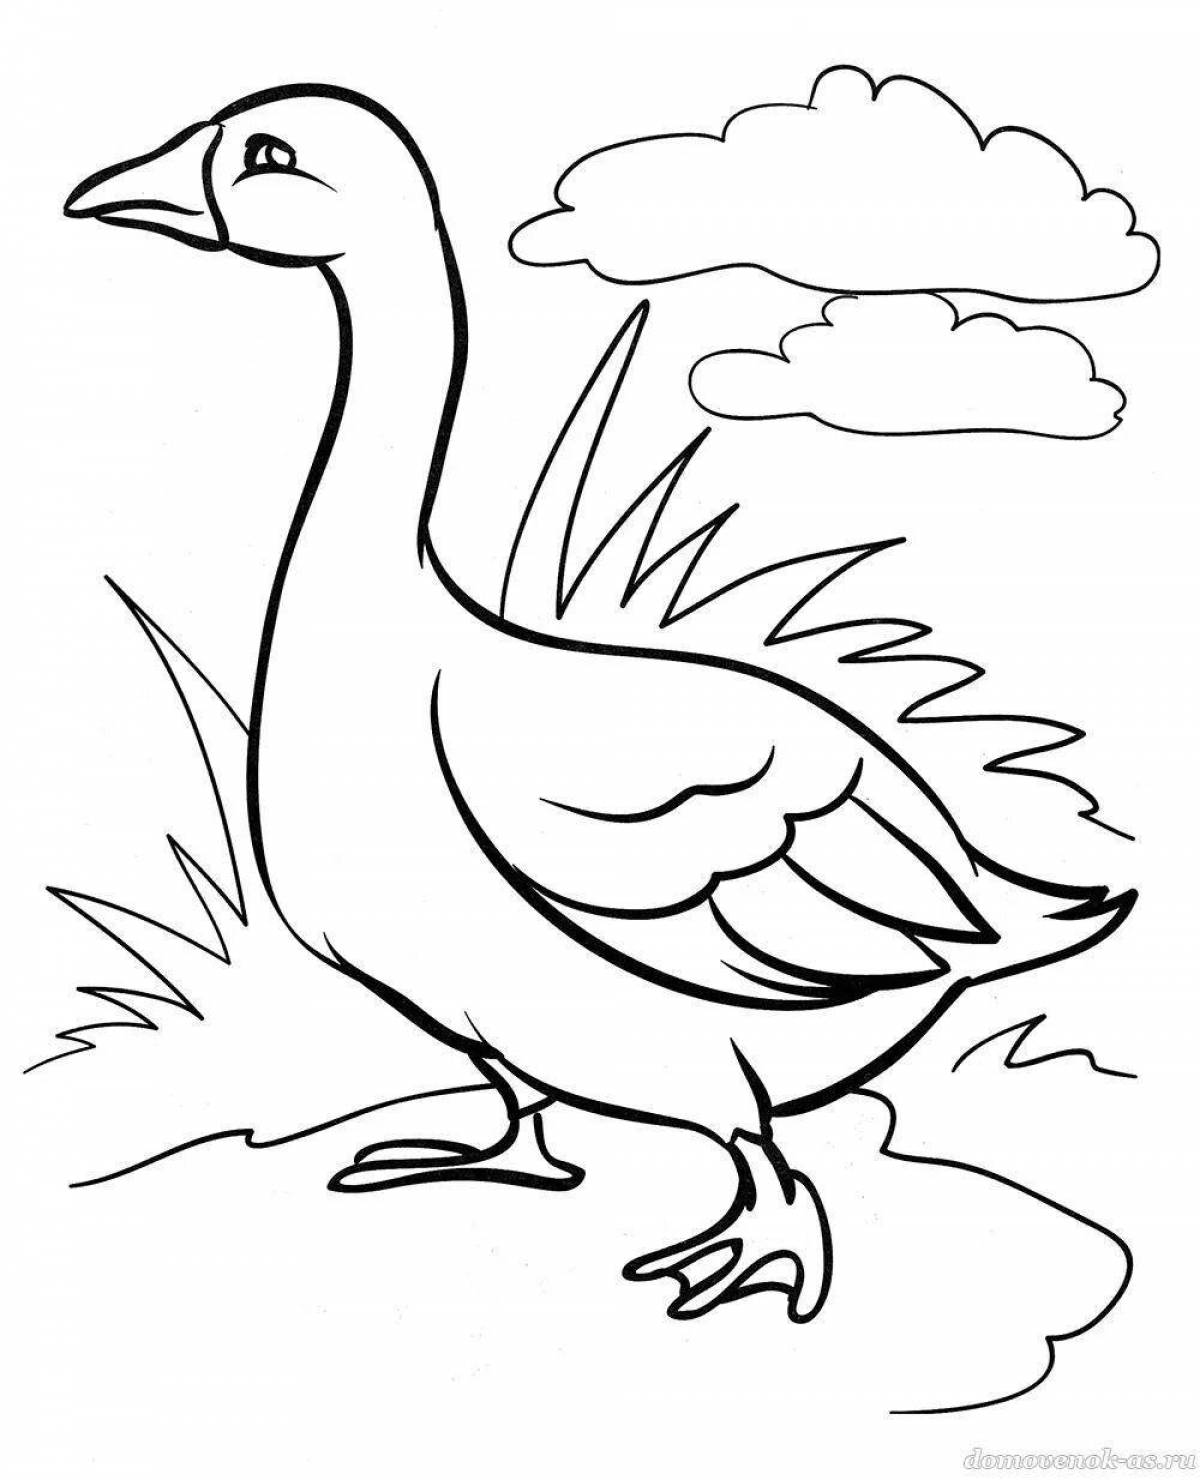 Playful poultry coloring page for 6-7 year olds